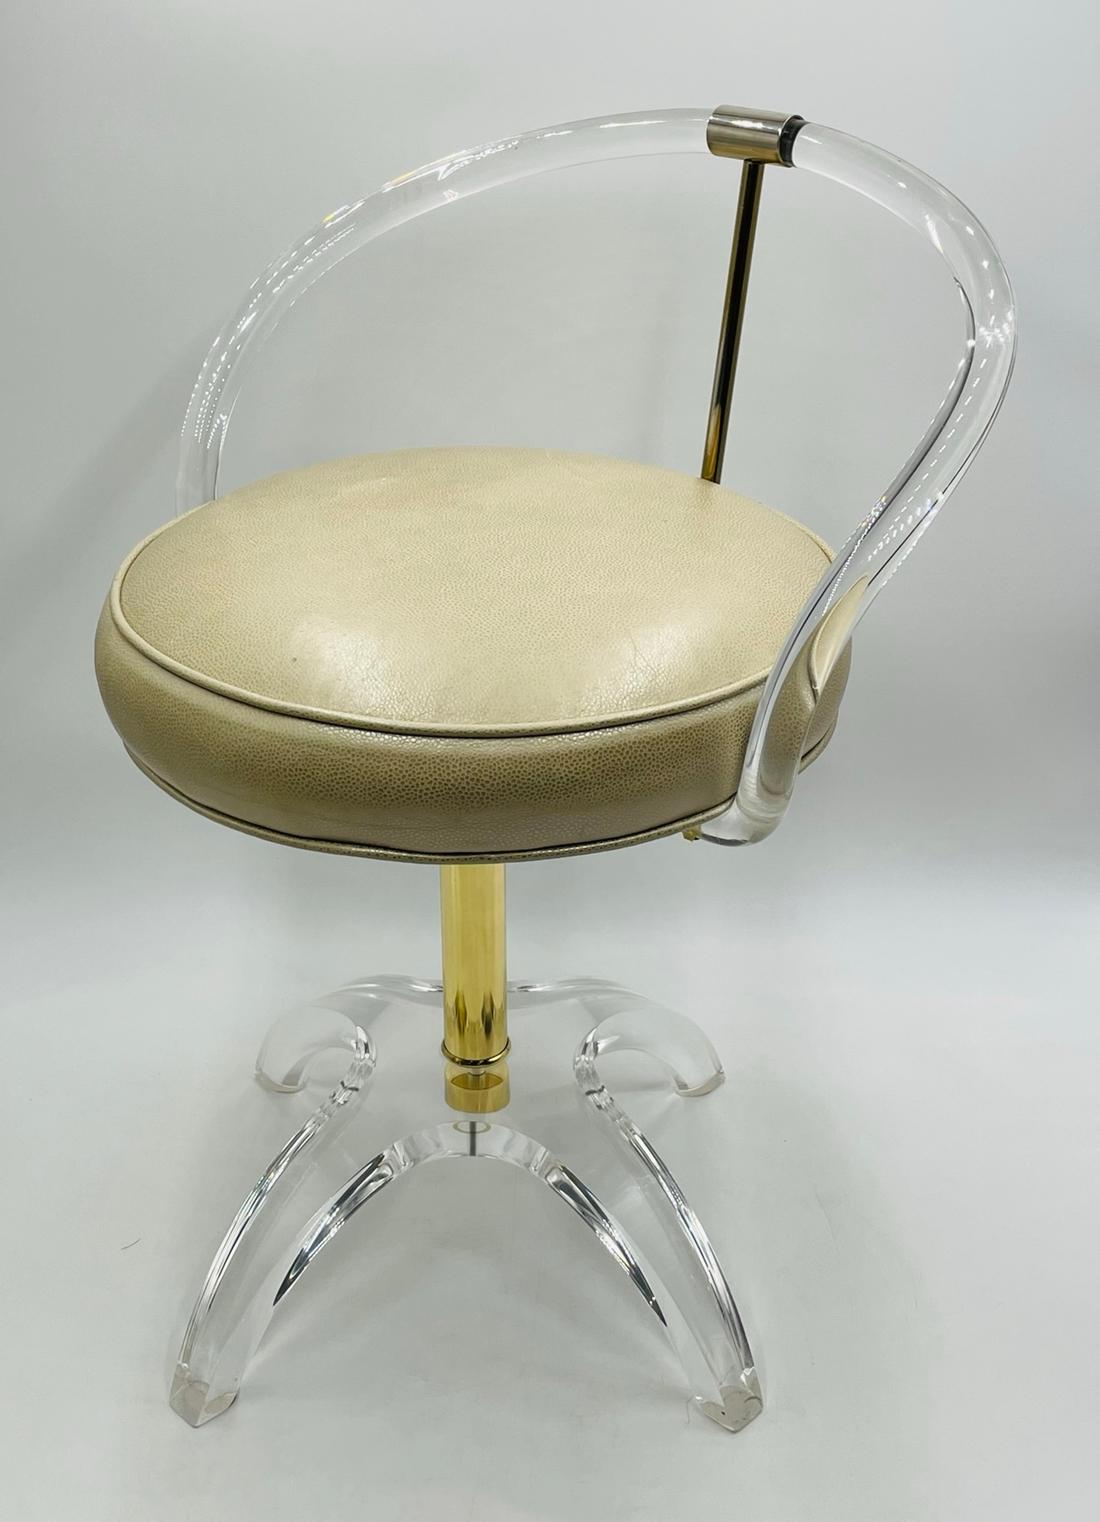 Stunning Lucite and brass vanity chair designed by Charles Hollis Jones, the original and first design was in brass and commissioned by Lucille Ball. The chair is in good vintage condition.

 This exquisite piece of furniture is the perfect addition